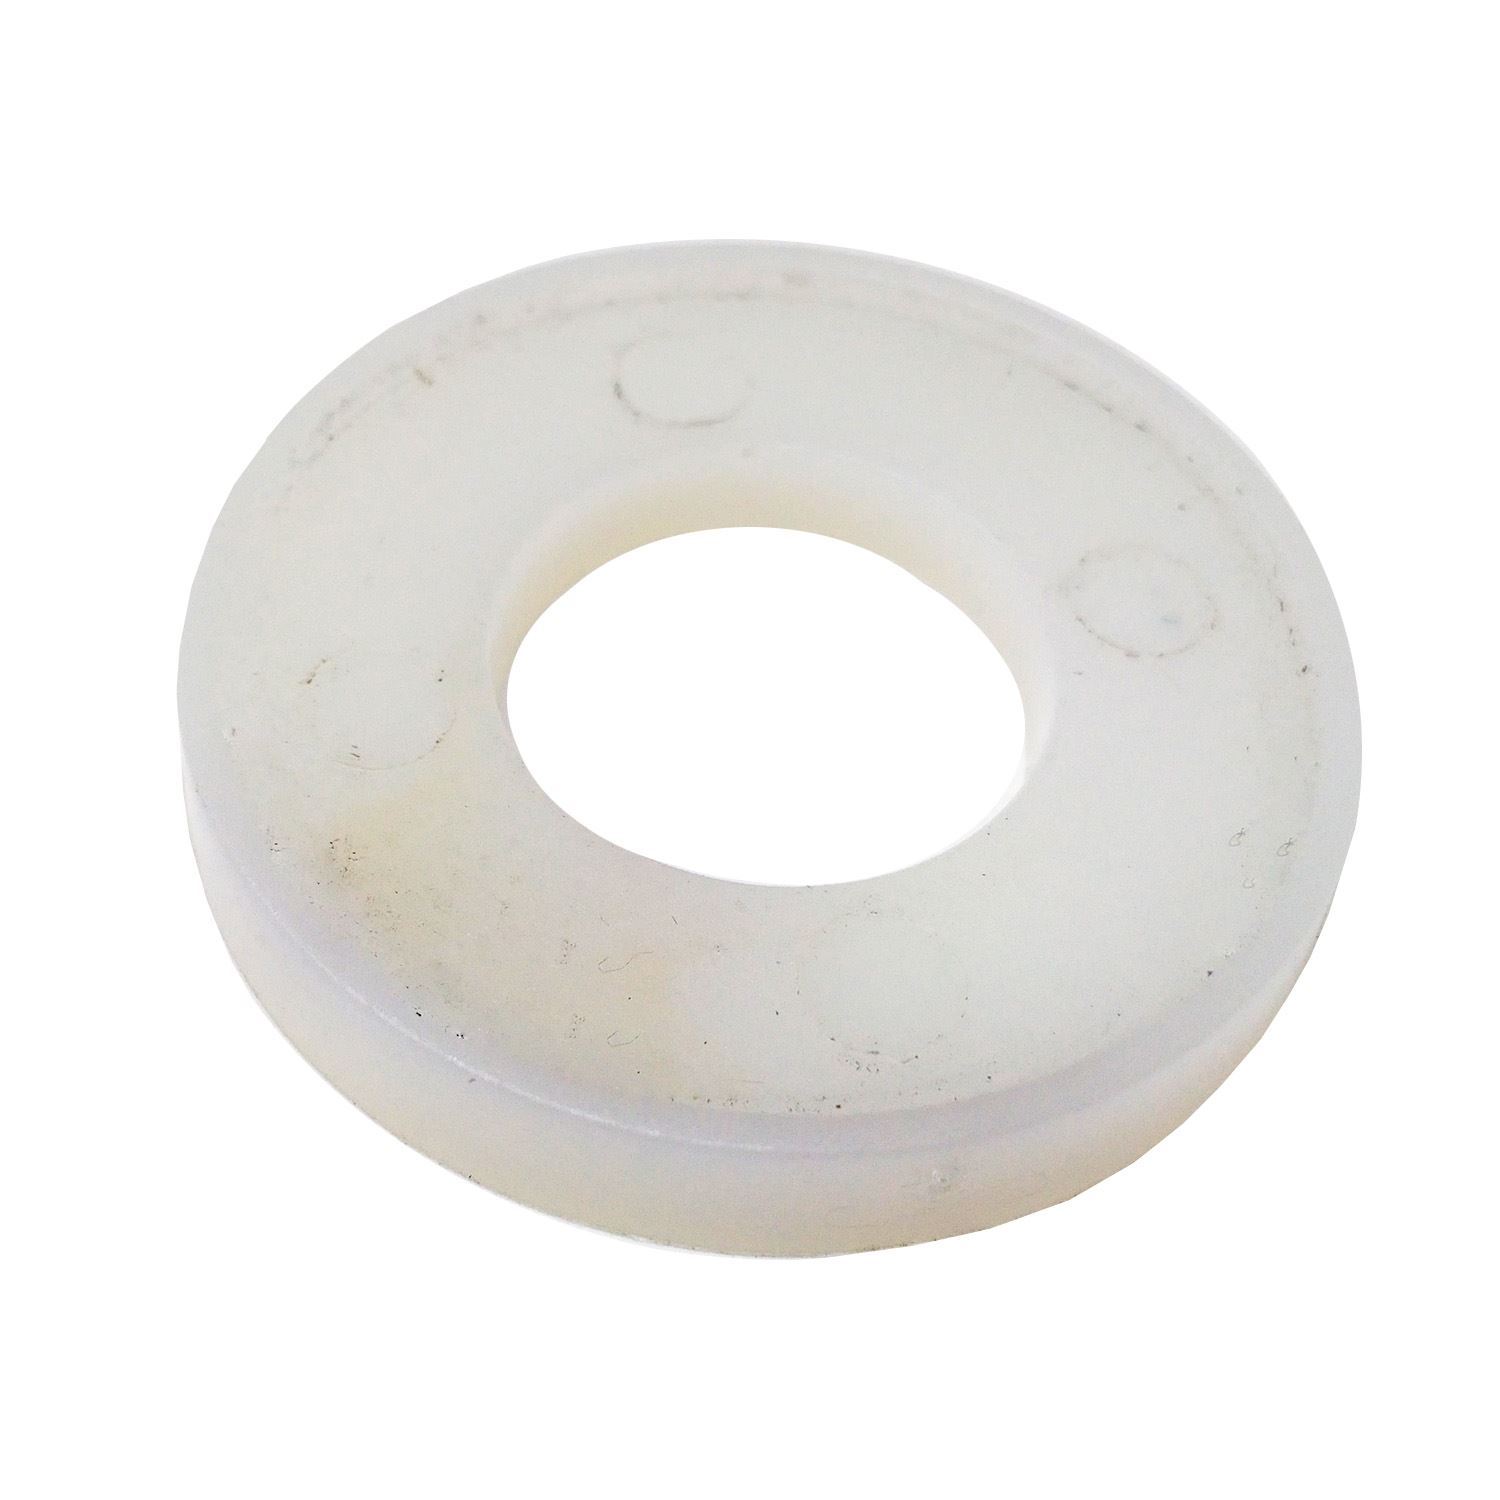 Auger Nylon Bushing for Traeger Portable Pellet Grill-YAOAWE